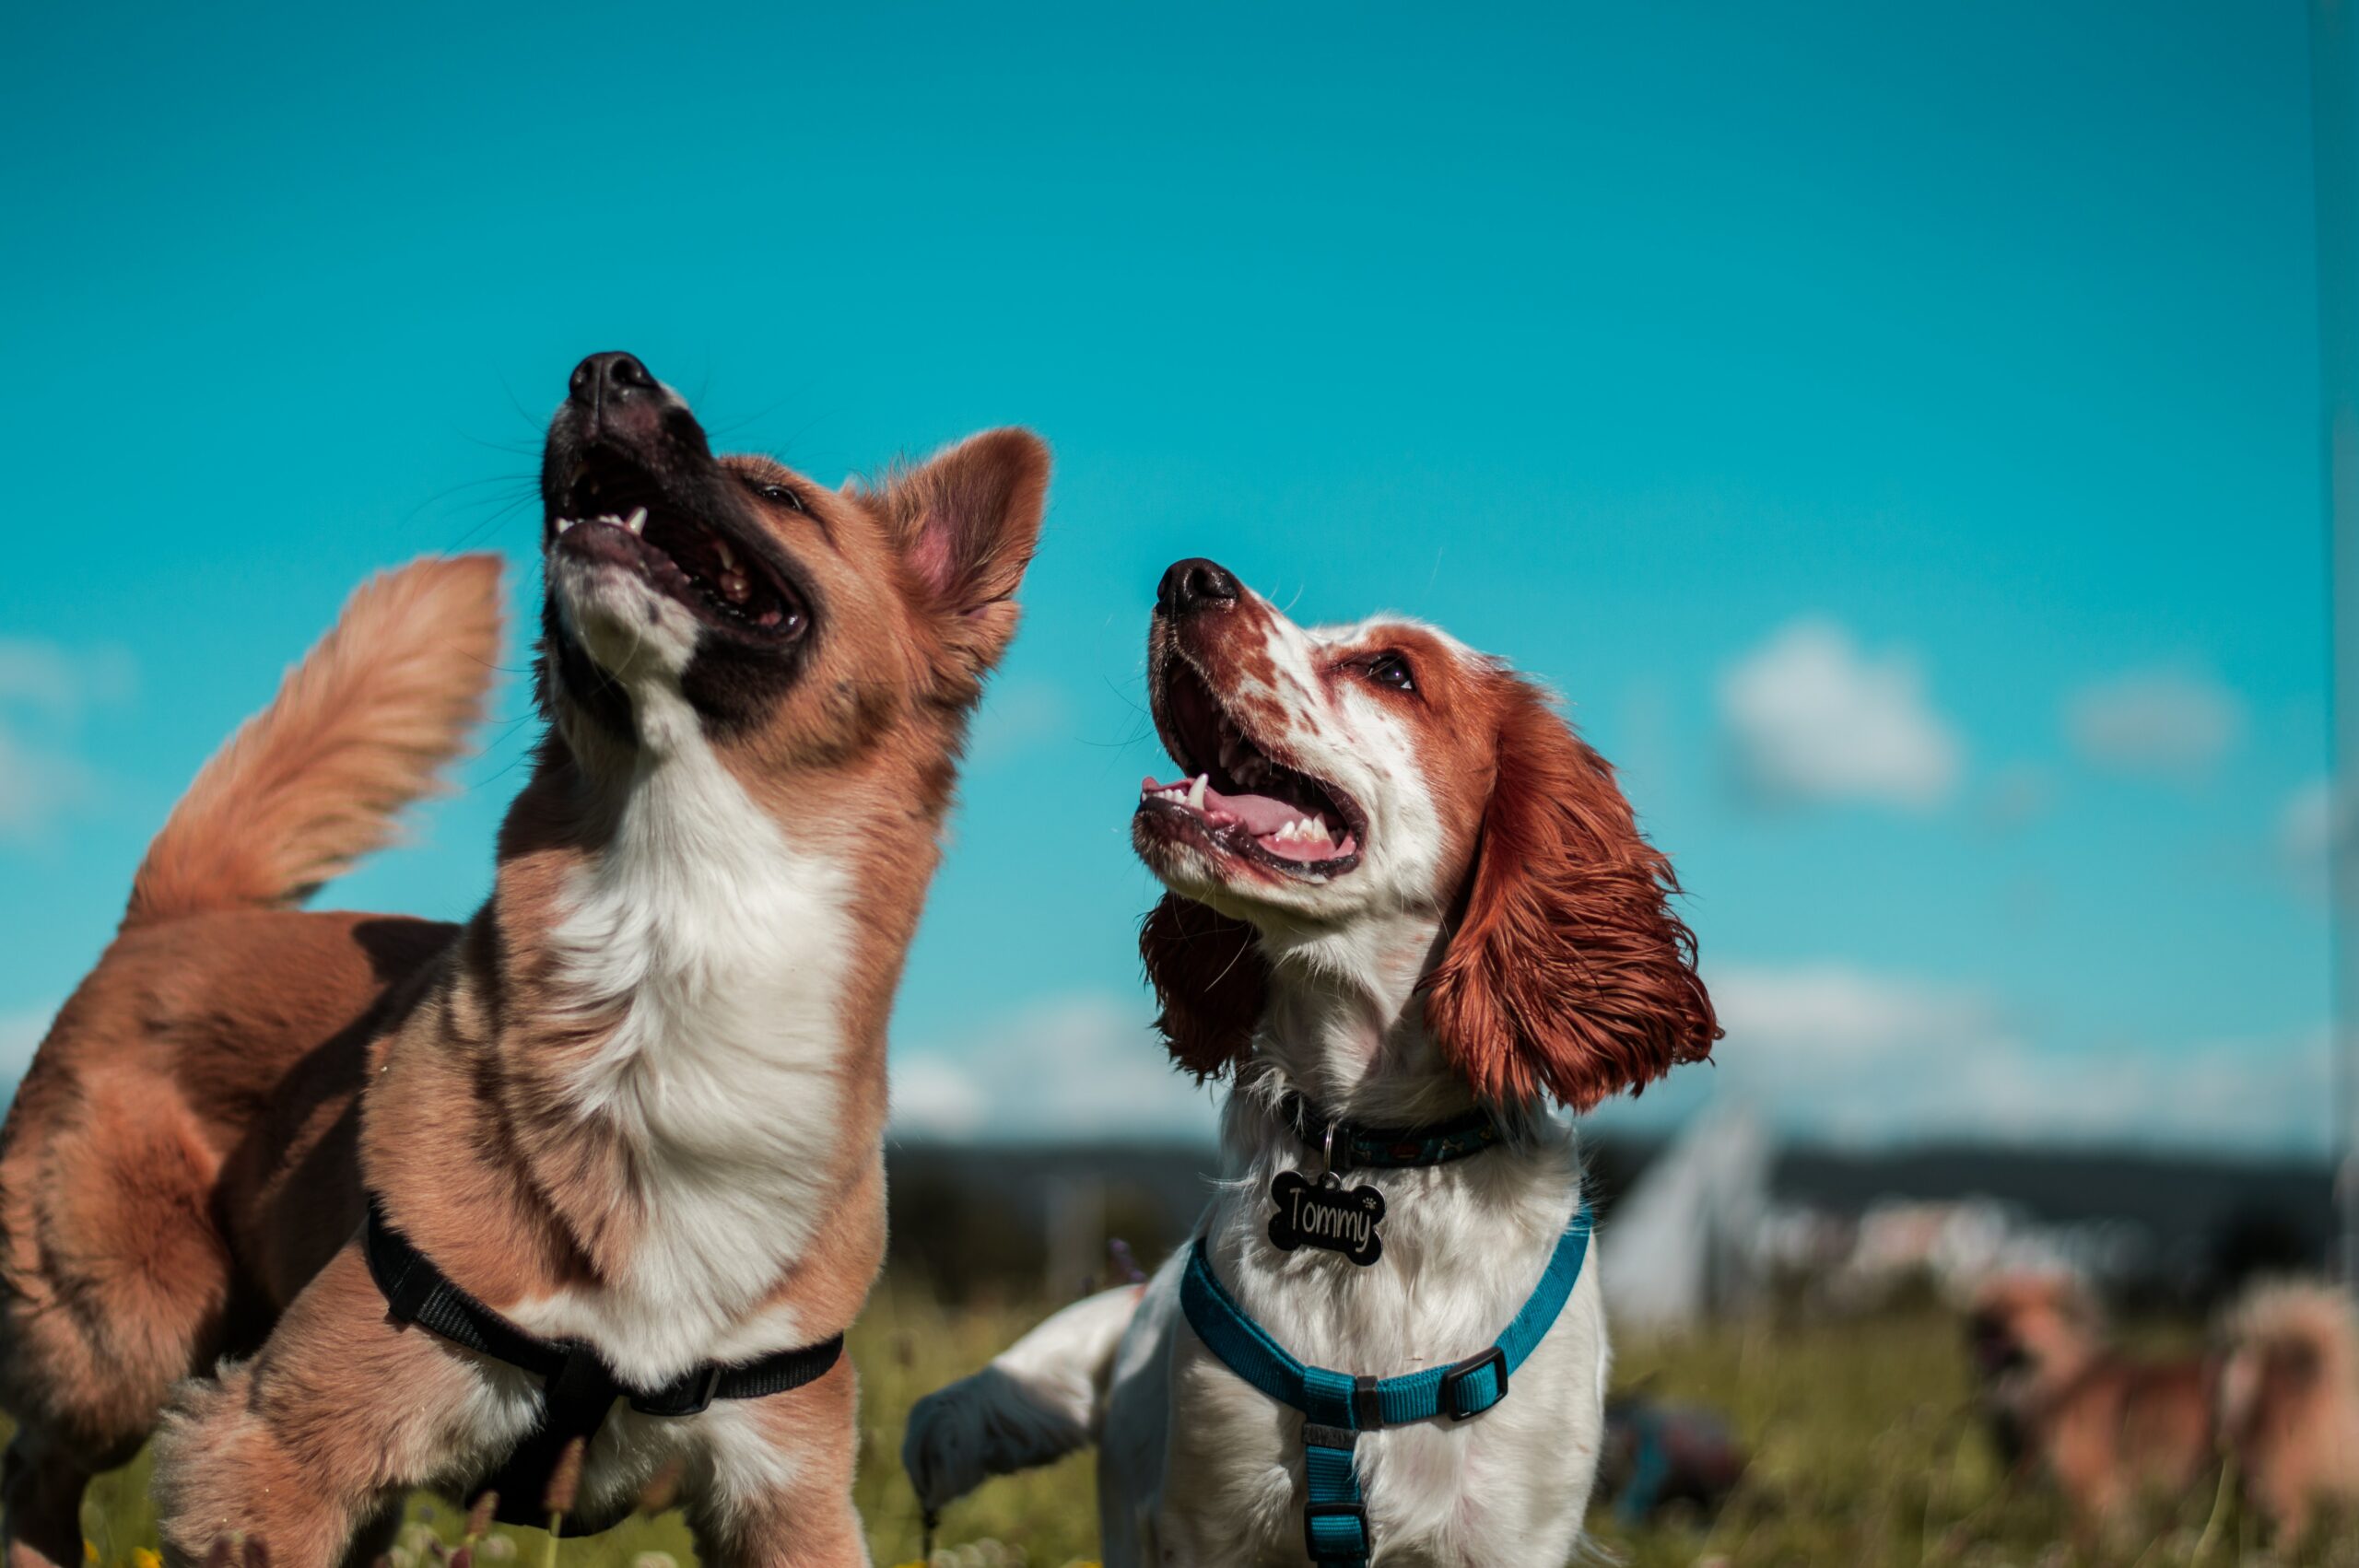 7 Trends You May Have Missed About Learn About Dog Training